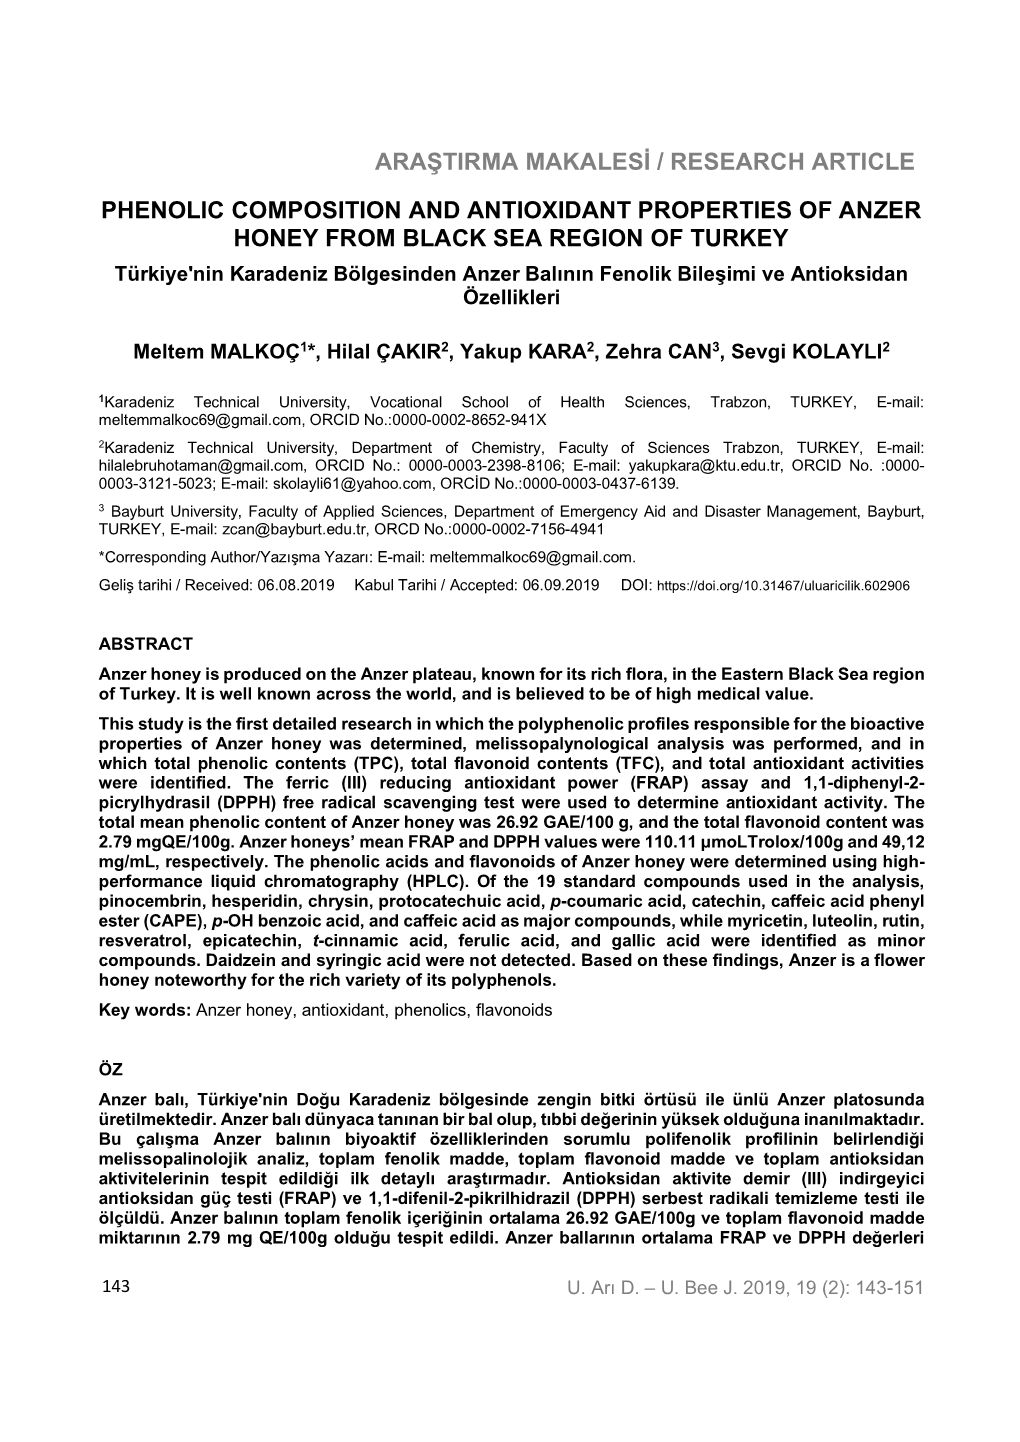 Phenolic Composition and Antioxidant Properties Of